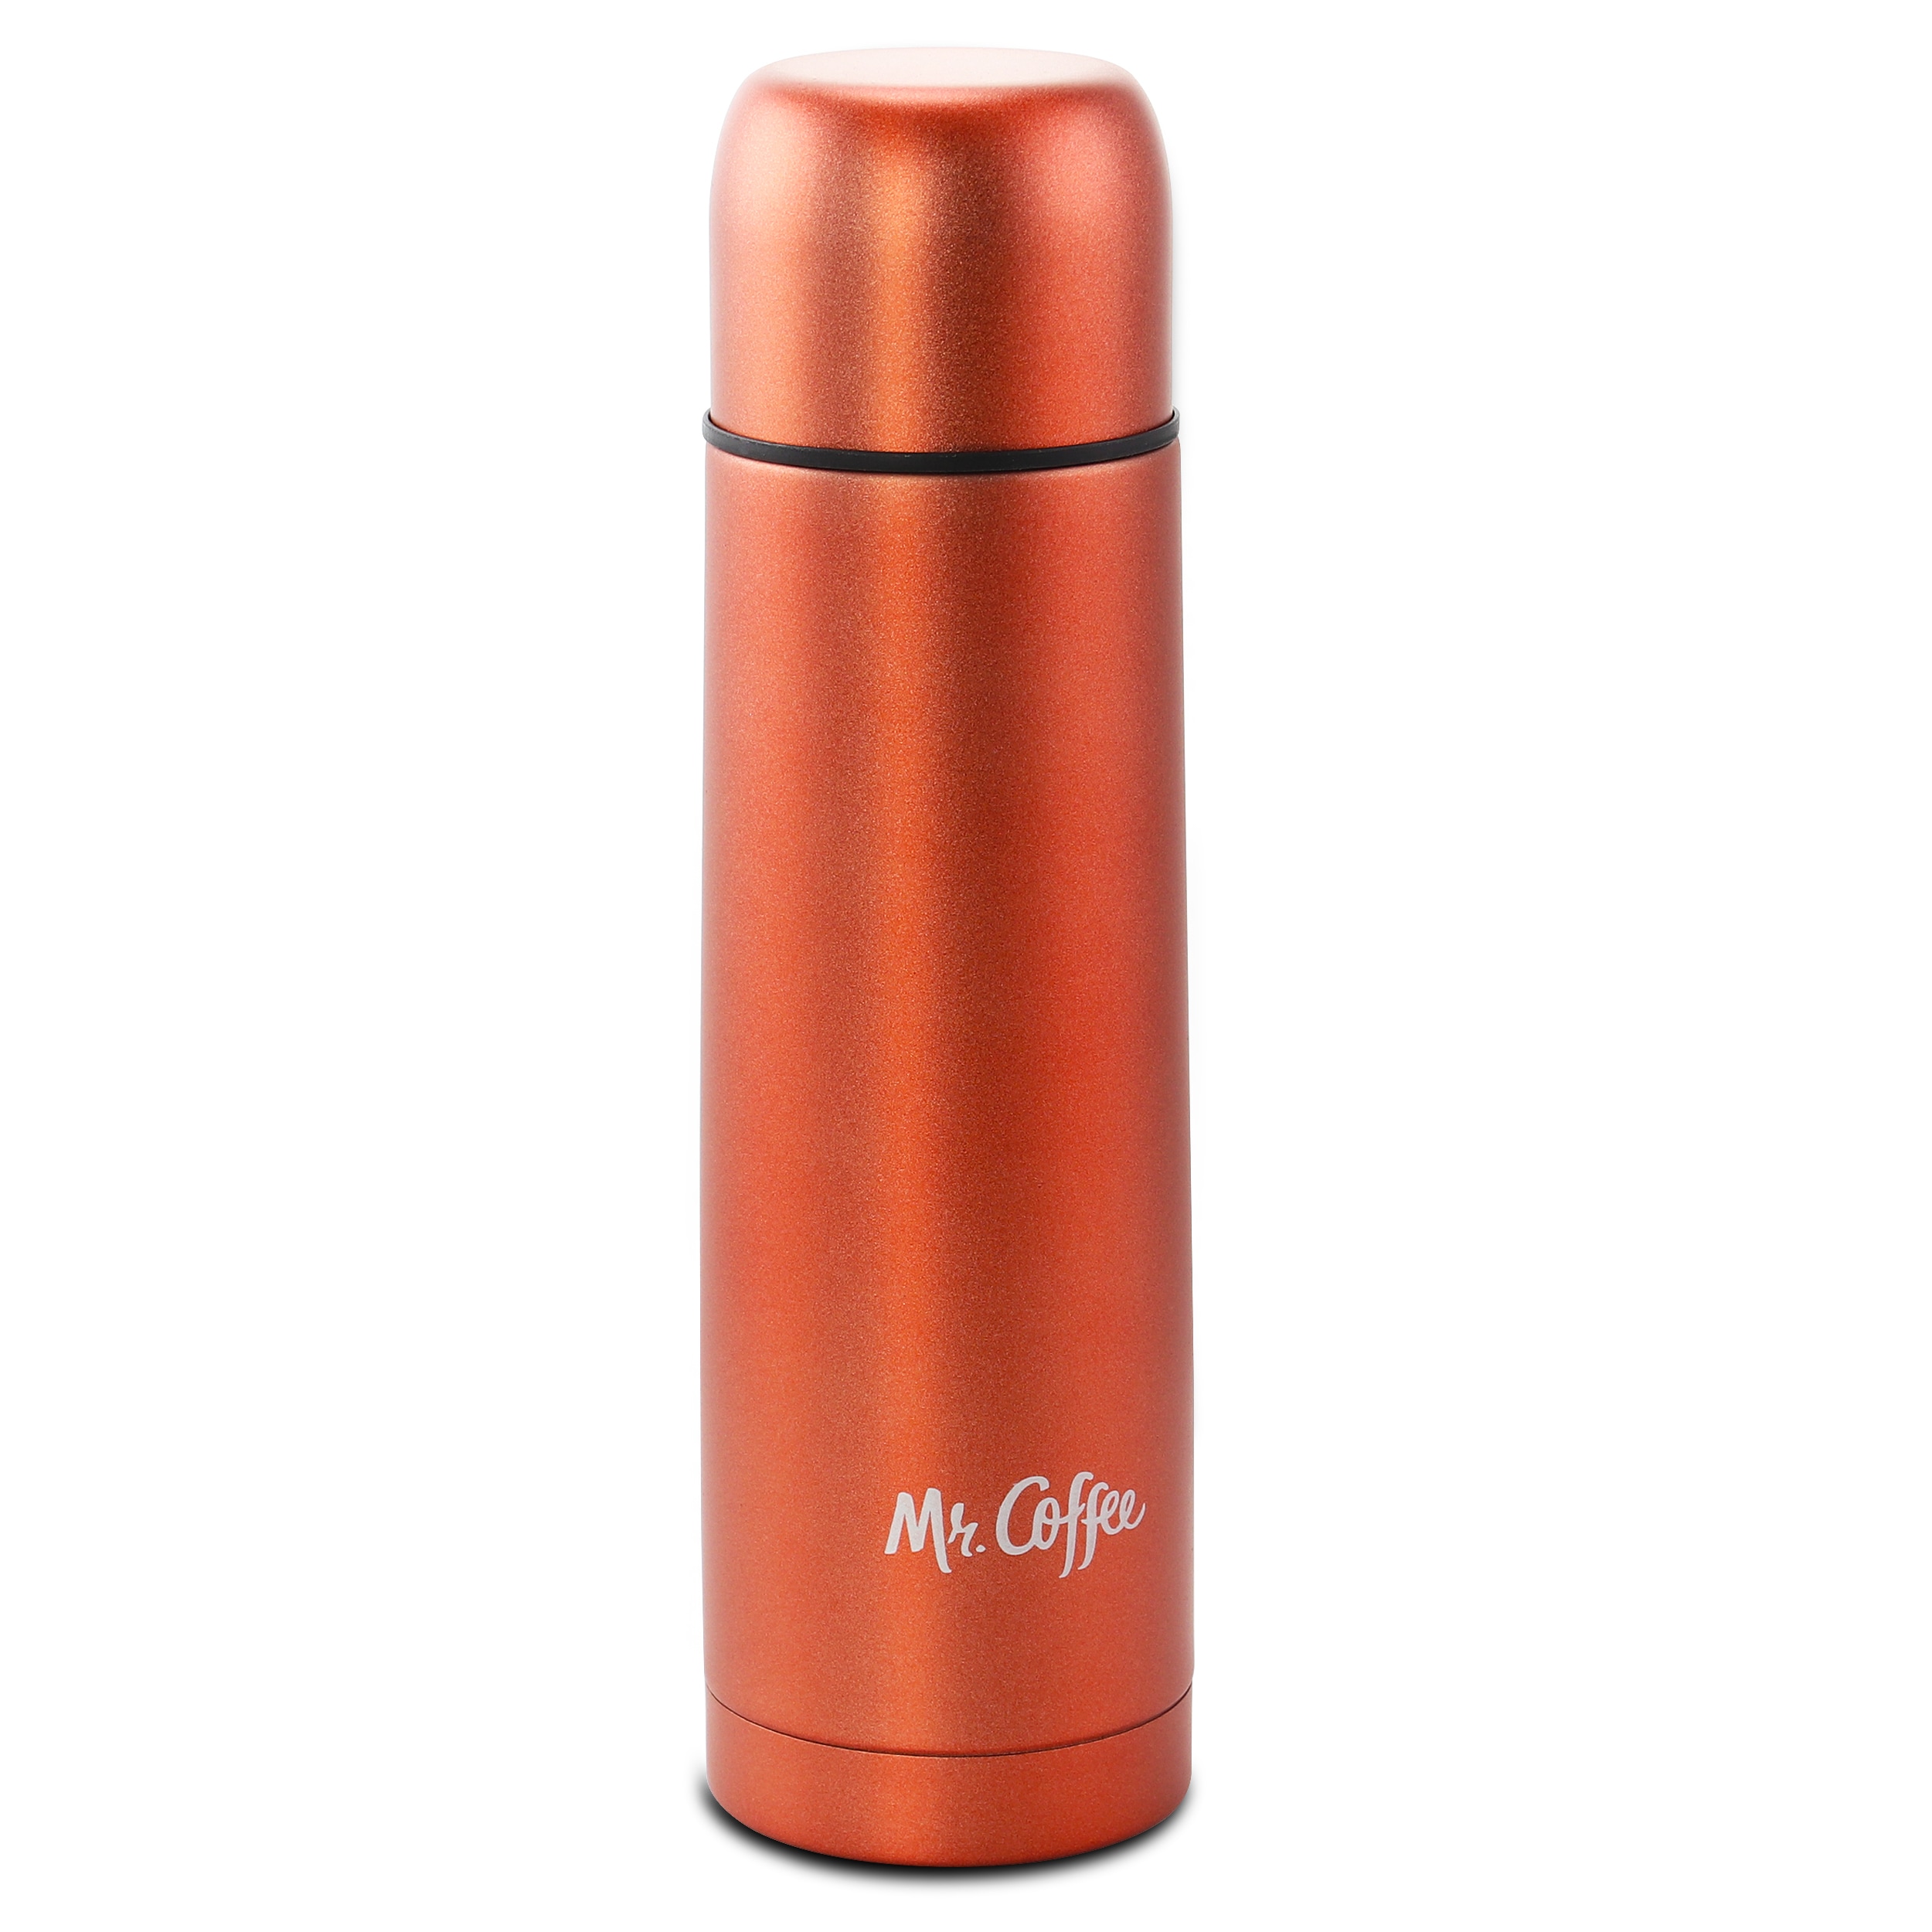 Mr. Coffee Double Wall Stainless Steel Water Bottle and Travel Mug Set